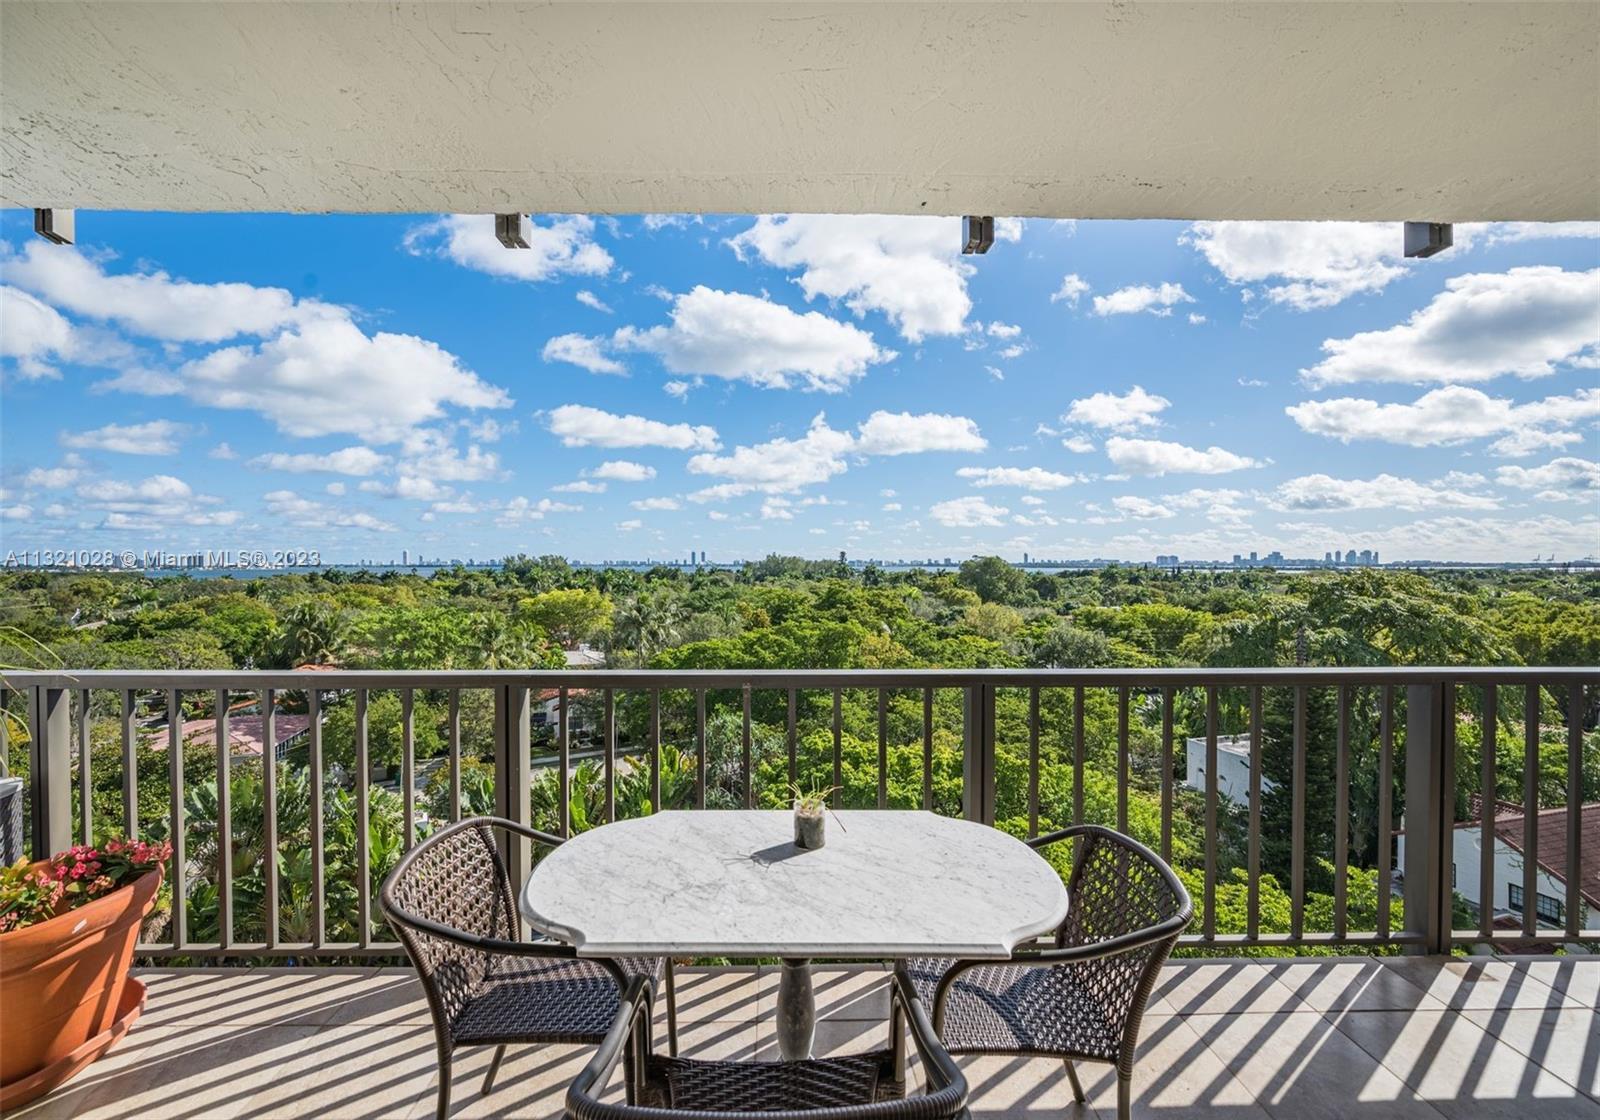 Rarely available corner unit with an unobstructed view overlooking the tree tops of Morningside and 